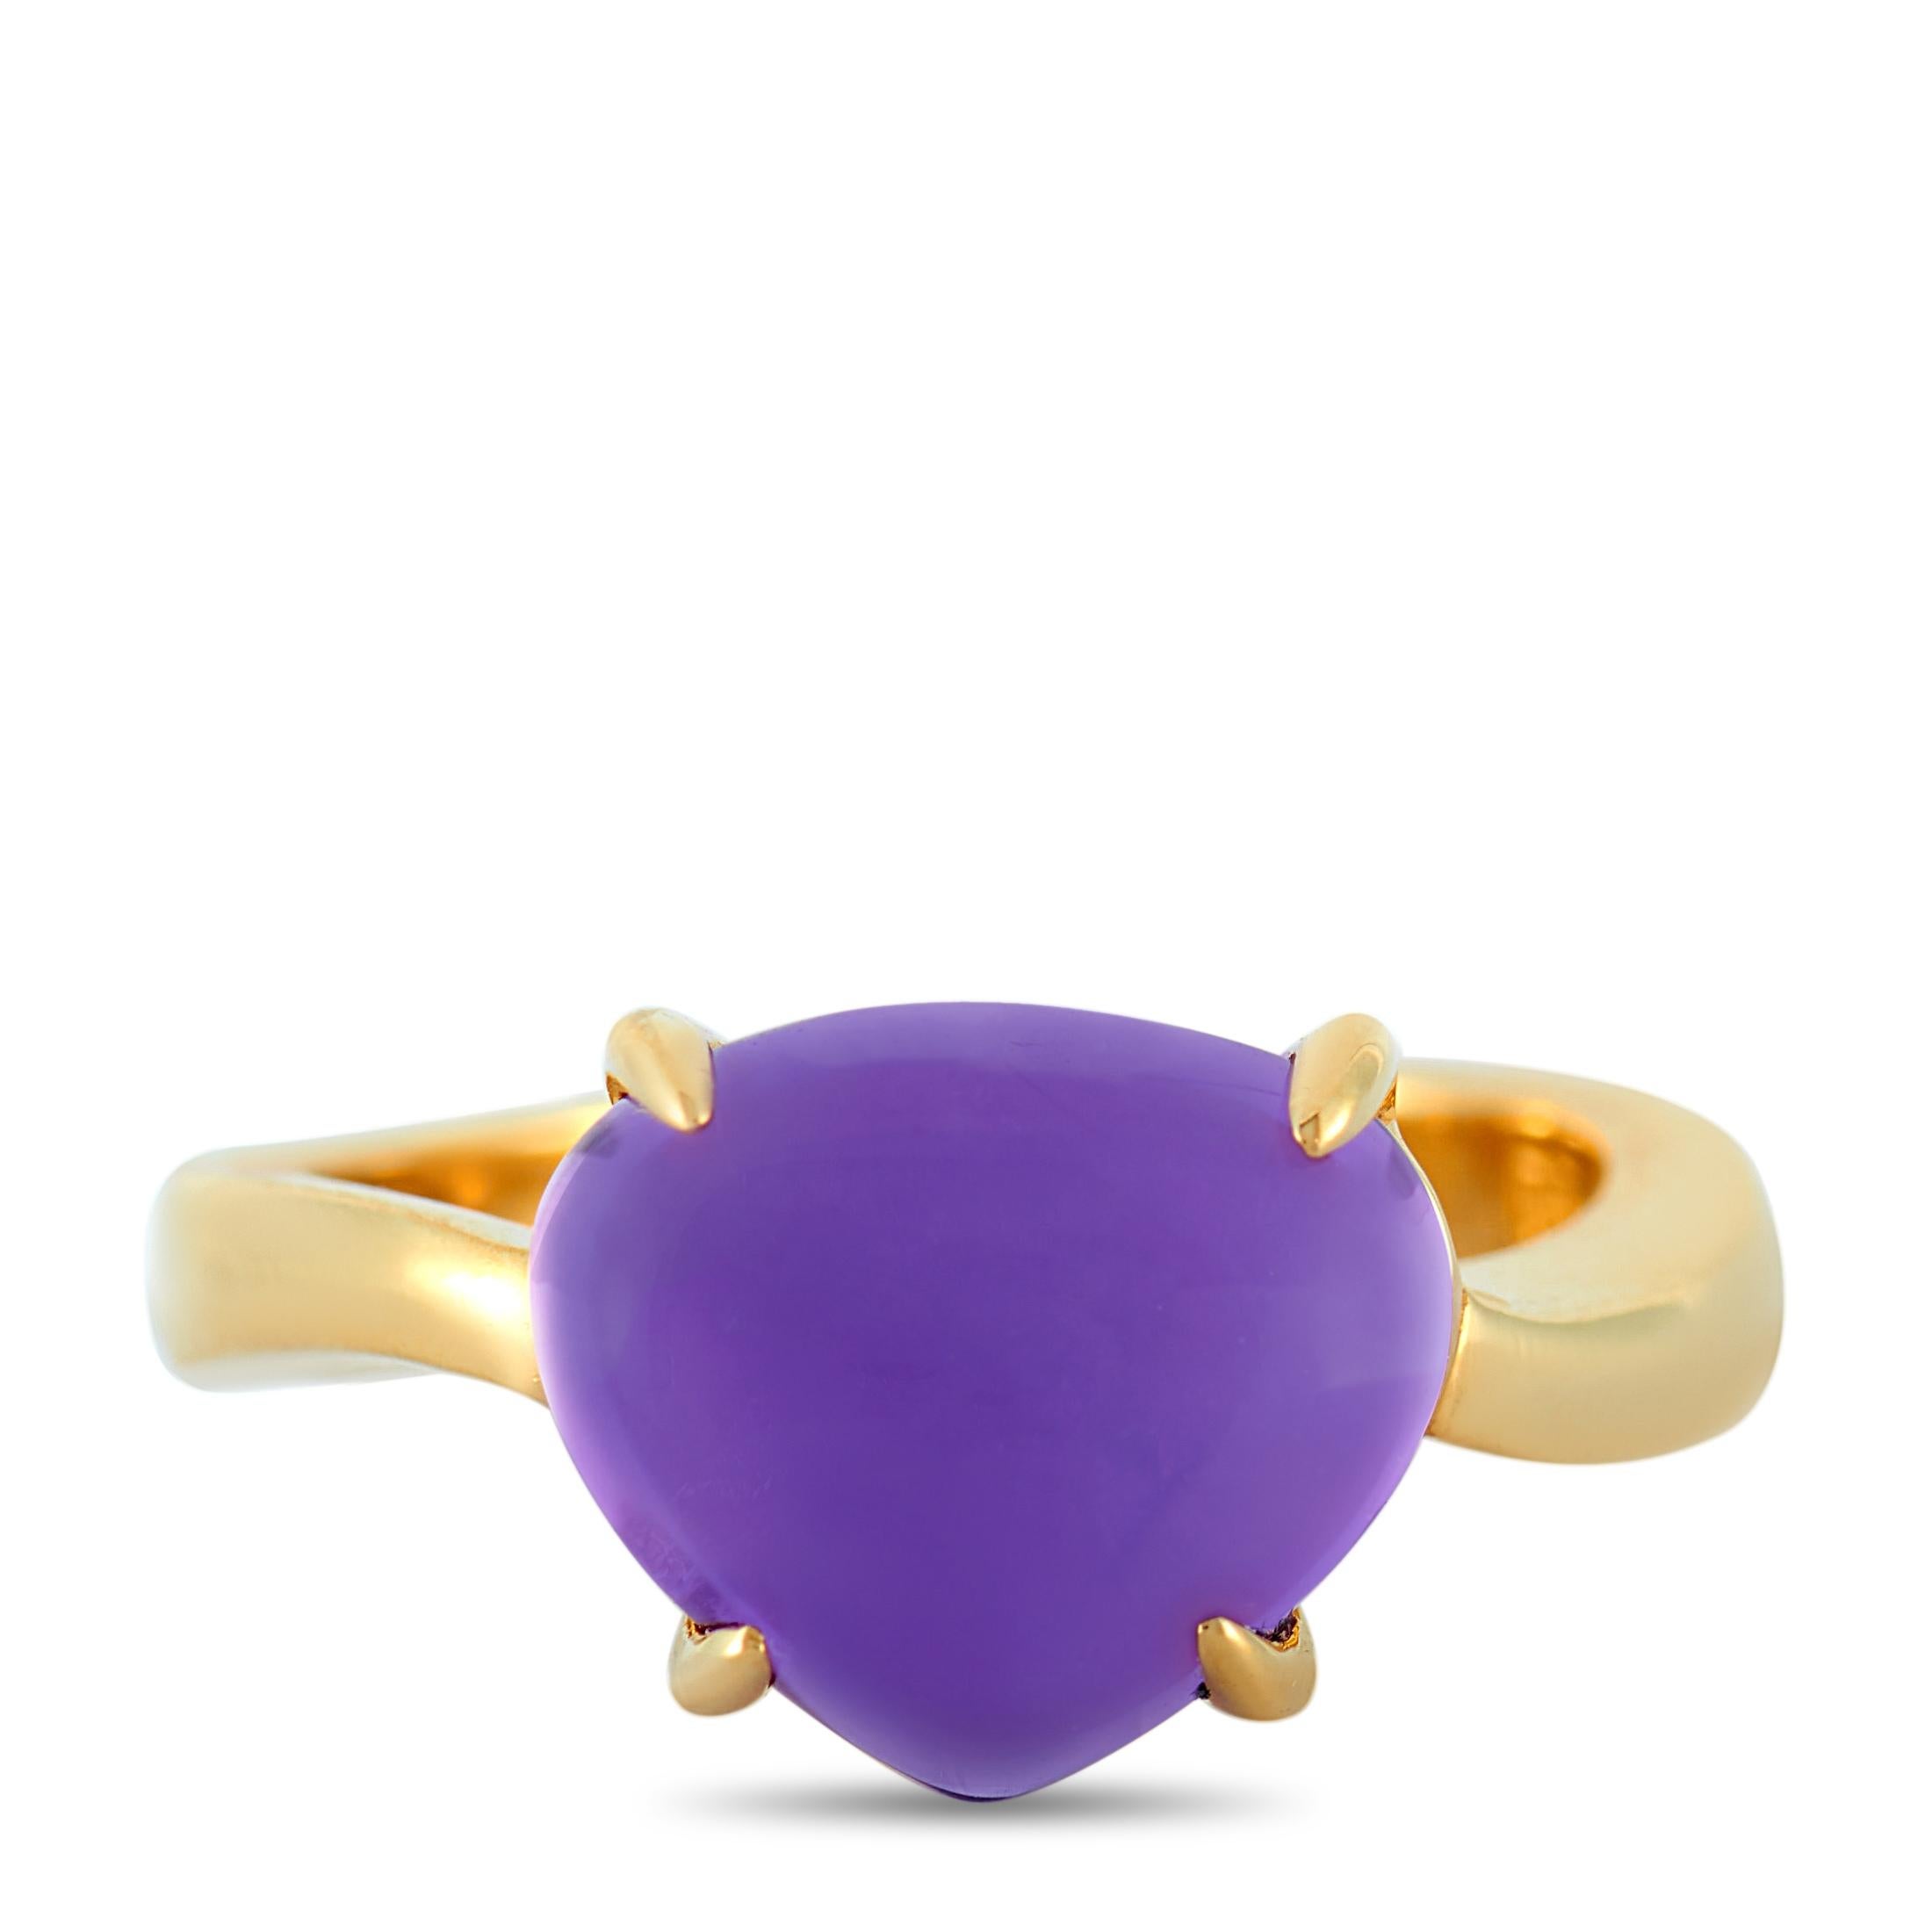 This Bvlgari ring is made of 18K yellow gold and embellished with an amethyst. The ring weighs 5.9 grams and boasts band thickness of 3 mm and top height of 6 mm, while top dimensions measure 11 by 9 mm.
 
 Offered in estate condition, this item